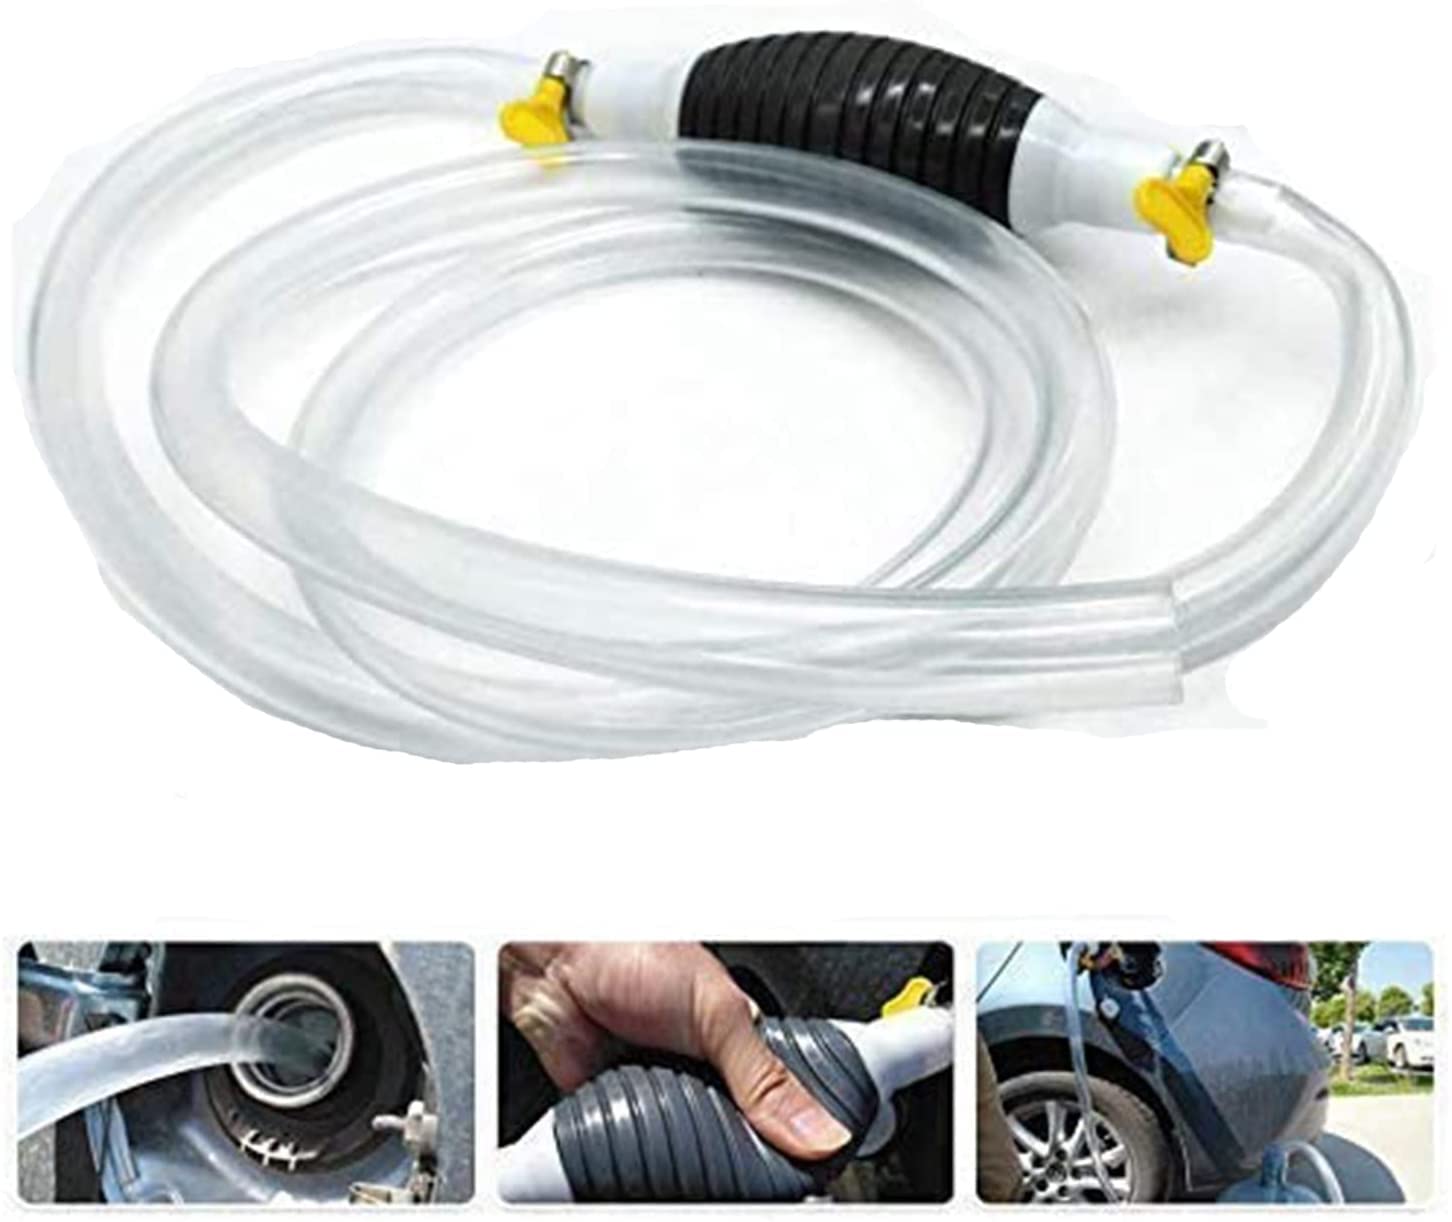 Multifunction Liquid Sucker,Manual Siphon Pump for Gasoline,Gas Gasoline Petrol Oil Liquid Water Fish Tank with 2M Syphon Hose,Siphon Pump for gasoline and other liquid water von Endxedio